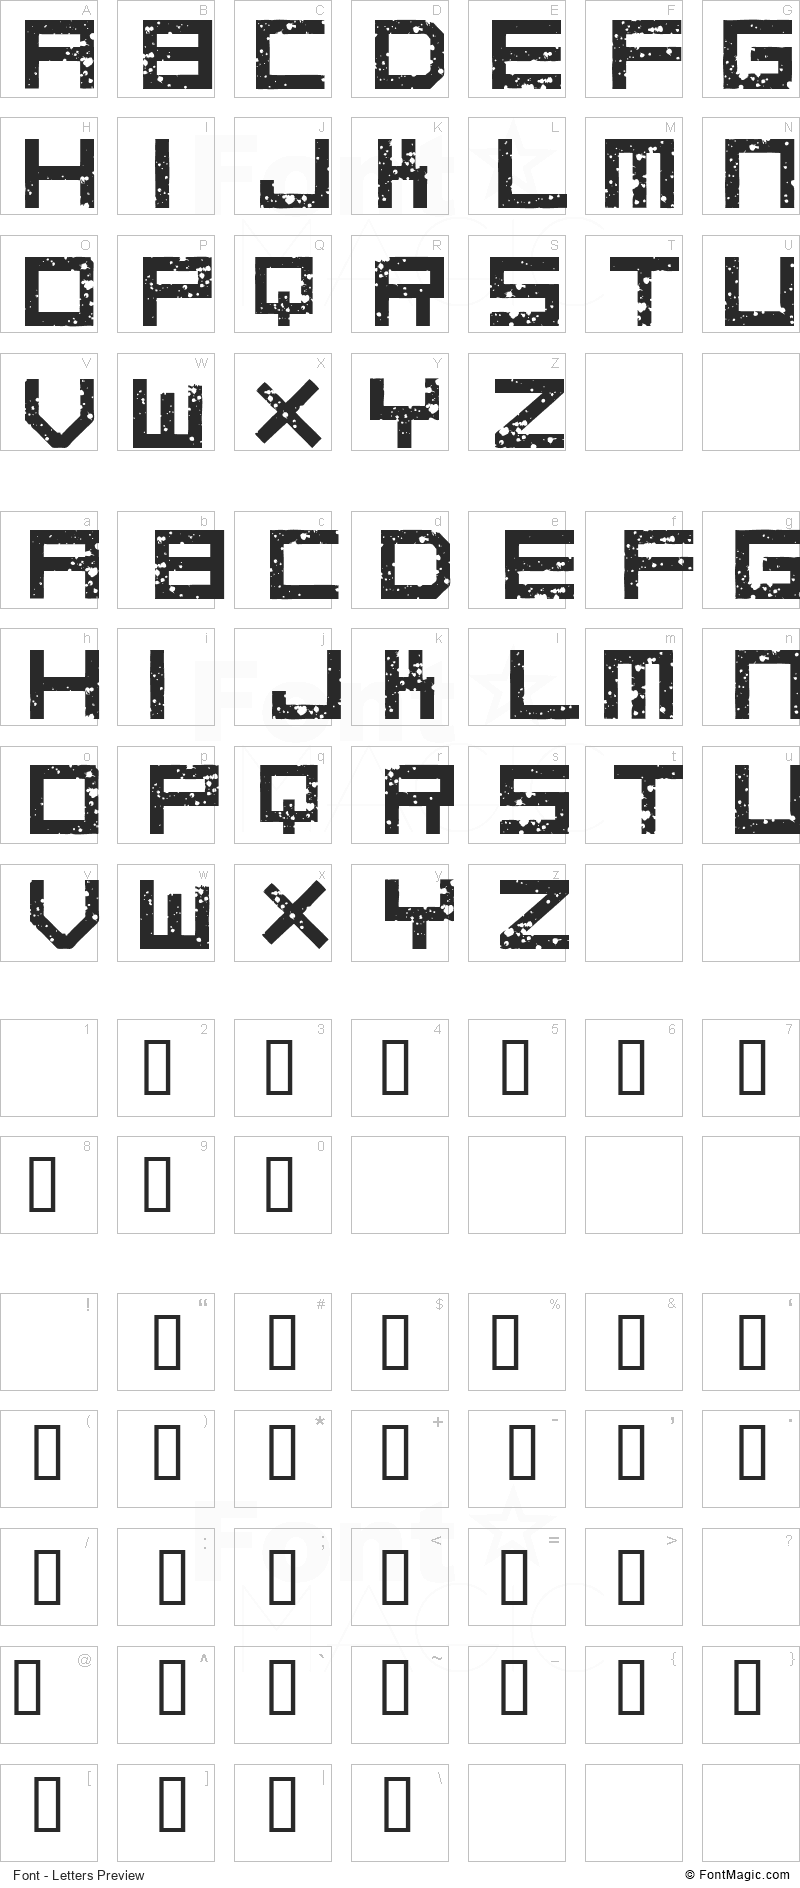 Digital Anarchy Font - All Latters Preview Chart